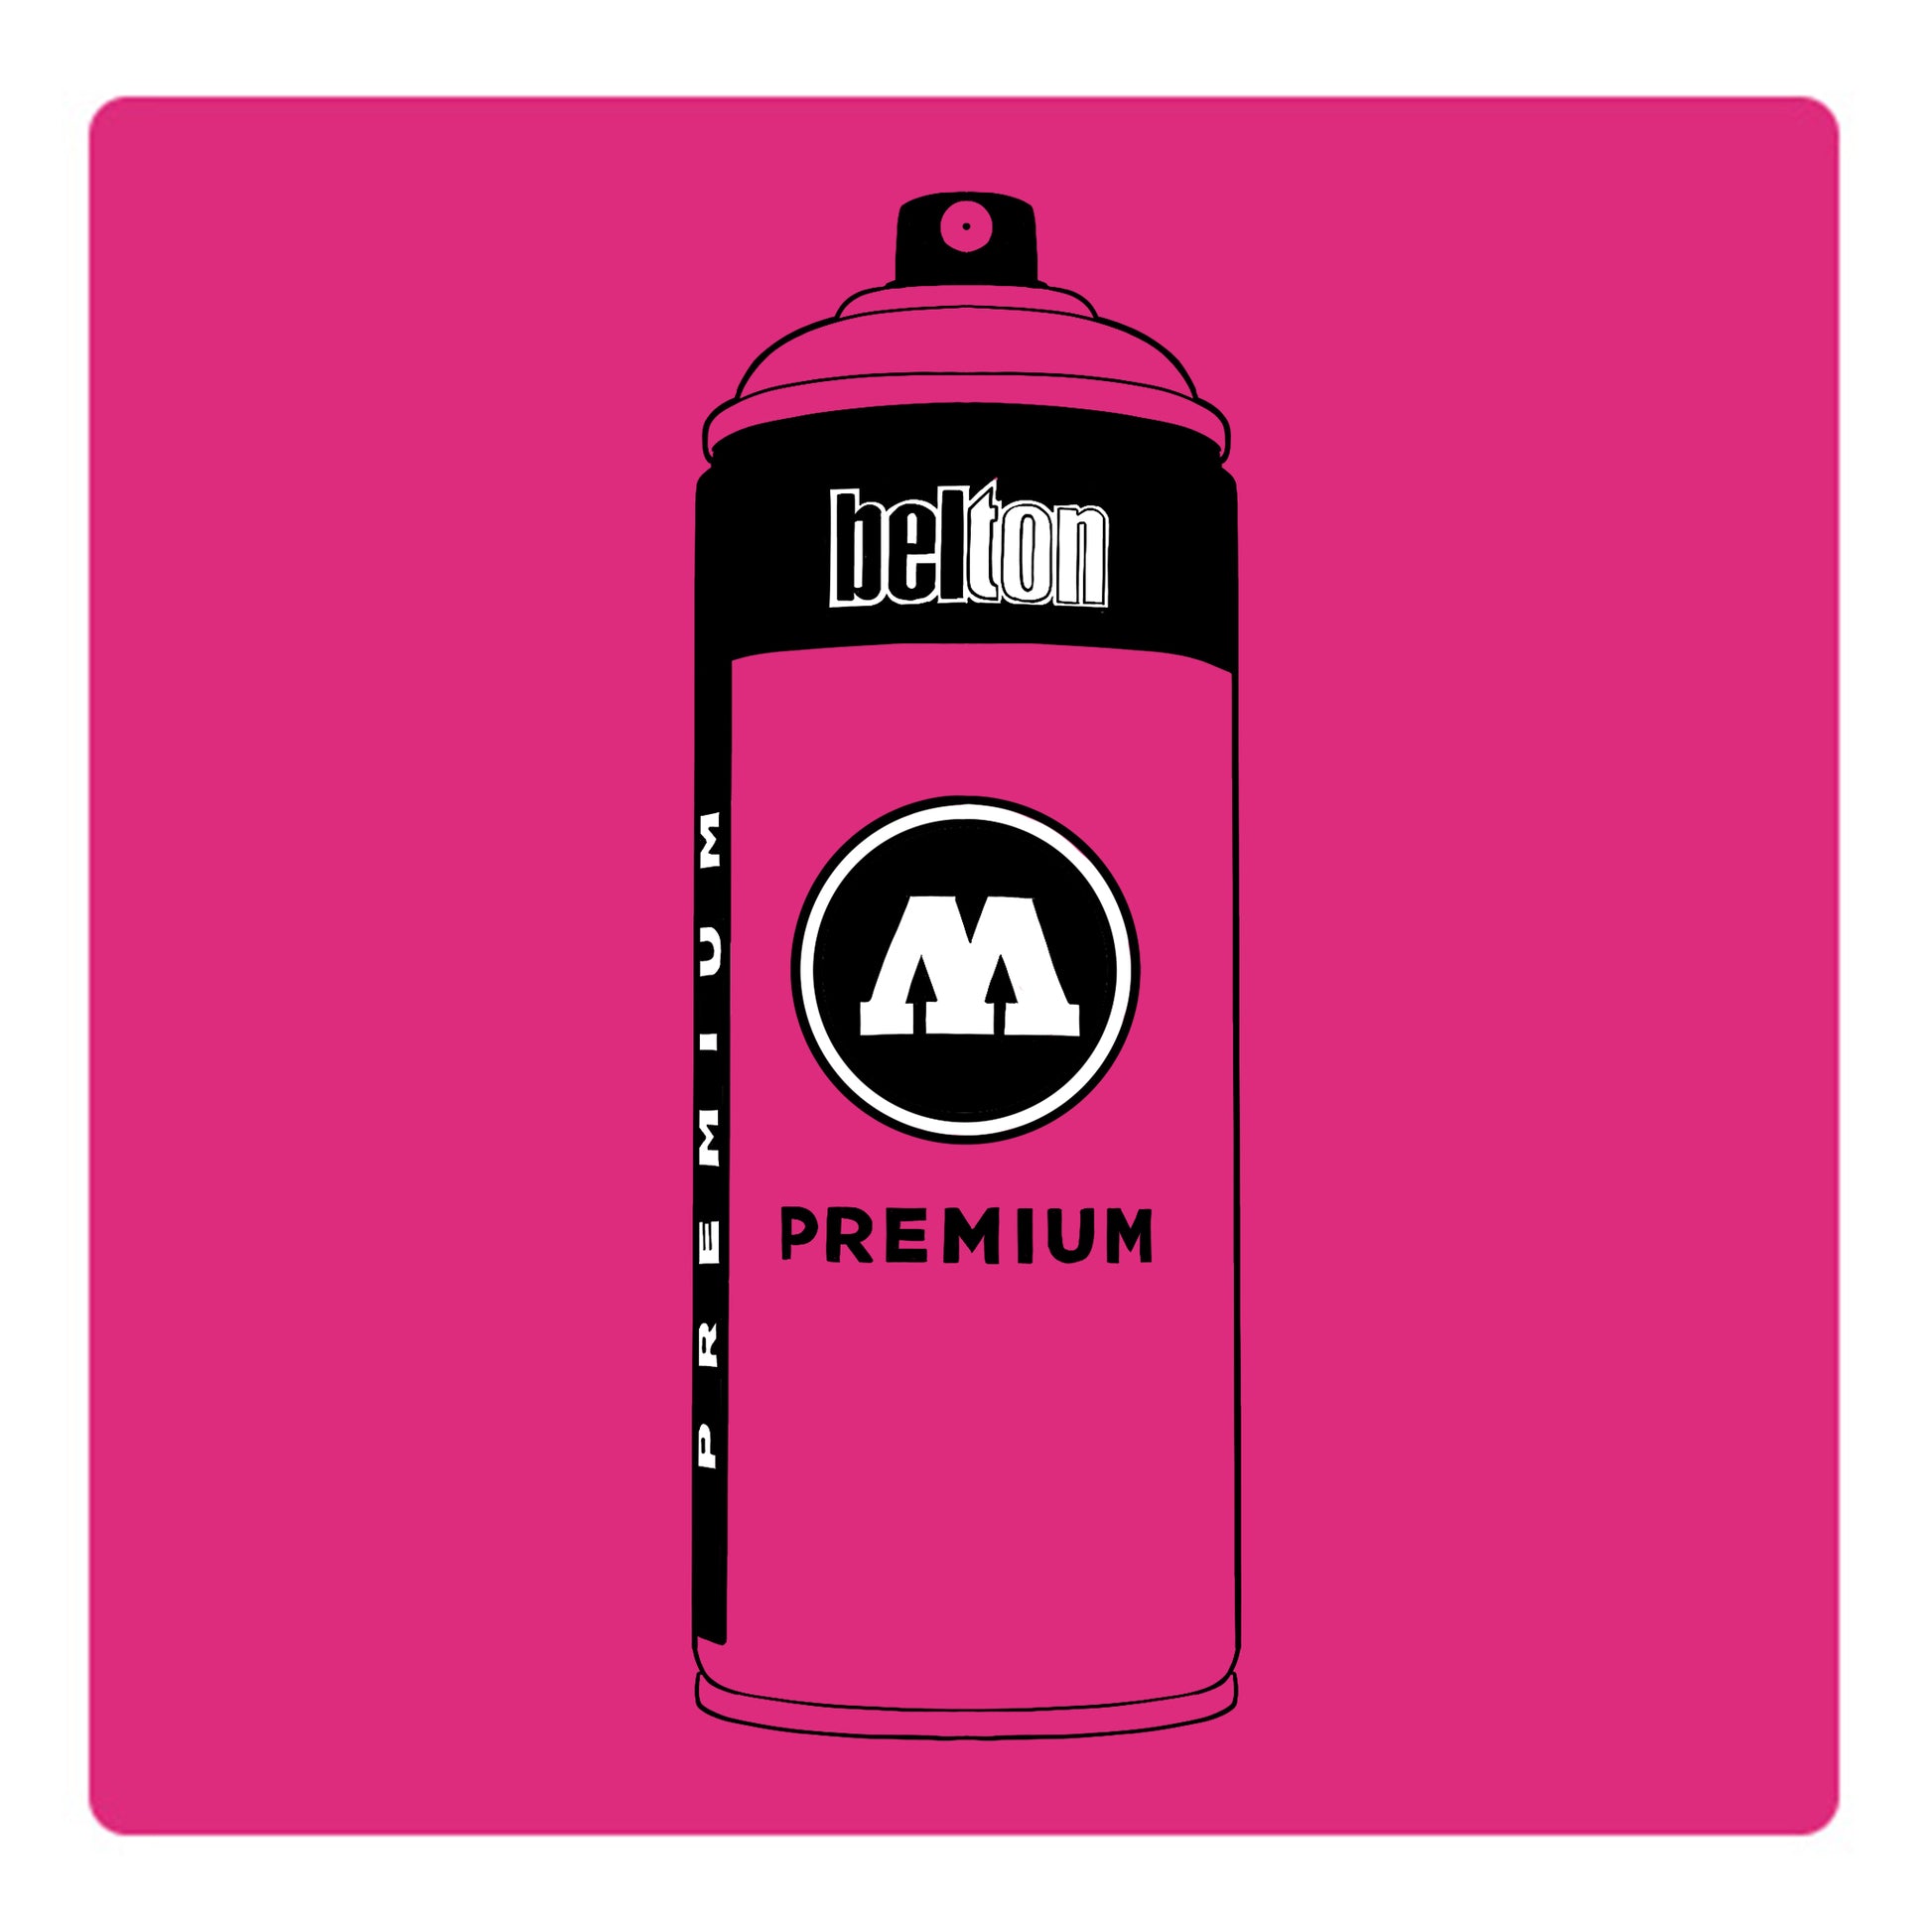 A black outline drawing of a neon hot pink spray paint can with the words "belton","premium" and the letter"M" written on the face in black and white font. The background is a color swatch of the same neon hot pink with a white border.